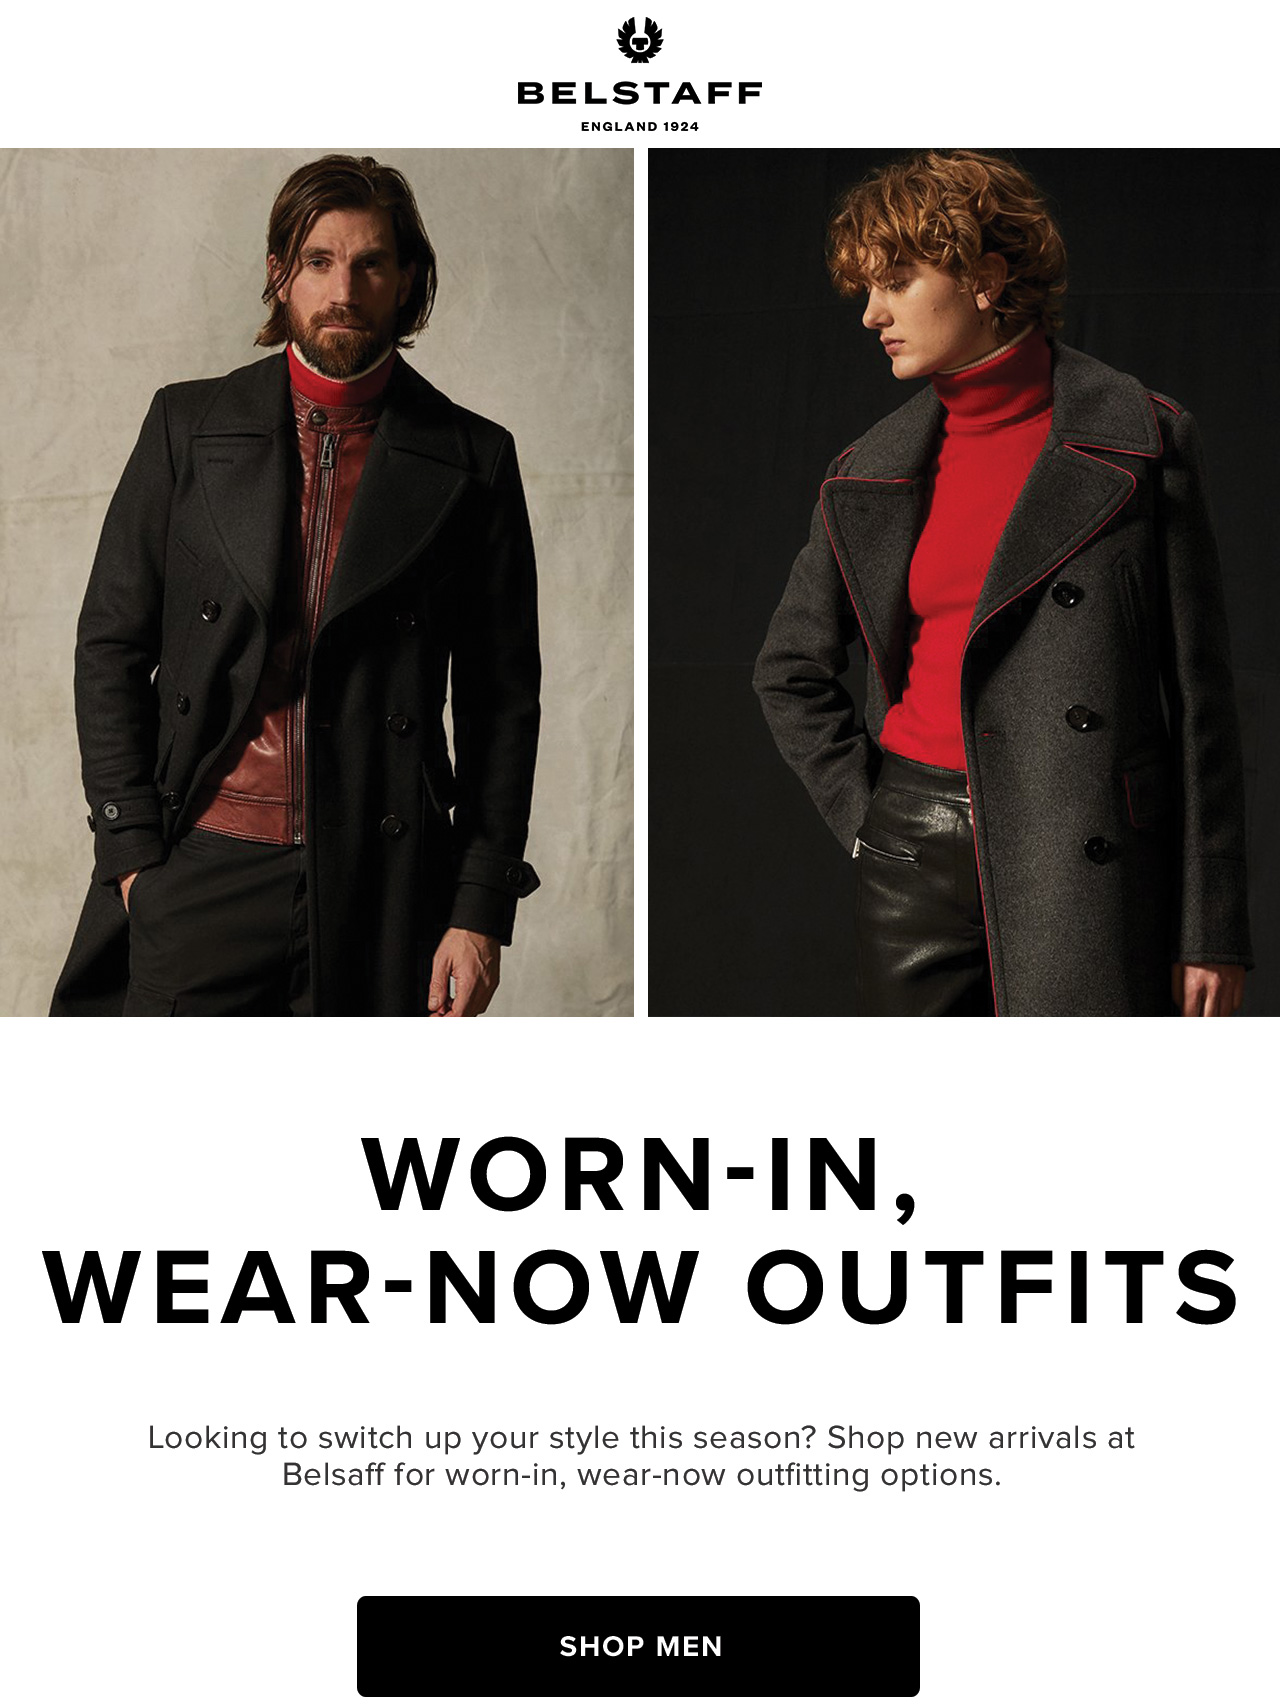 Looking to switch up your style this season? Shop new arrivals at Belsaff for worn-in, wear-now outfitting options.Shop Men.